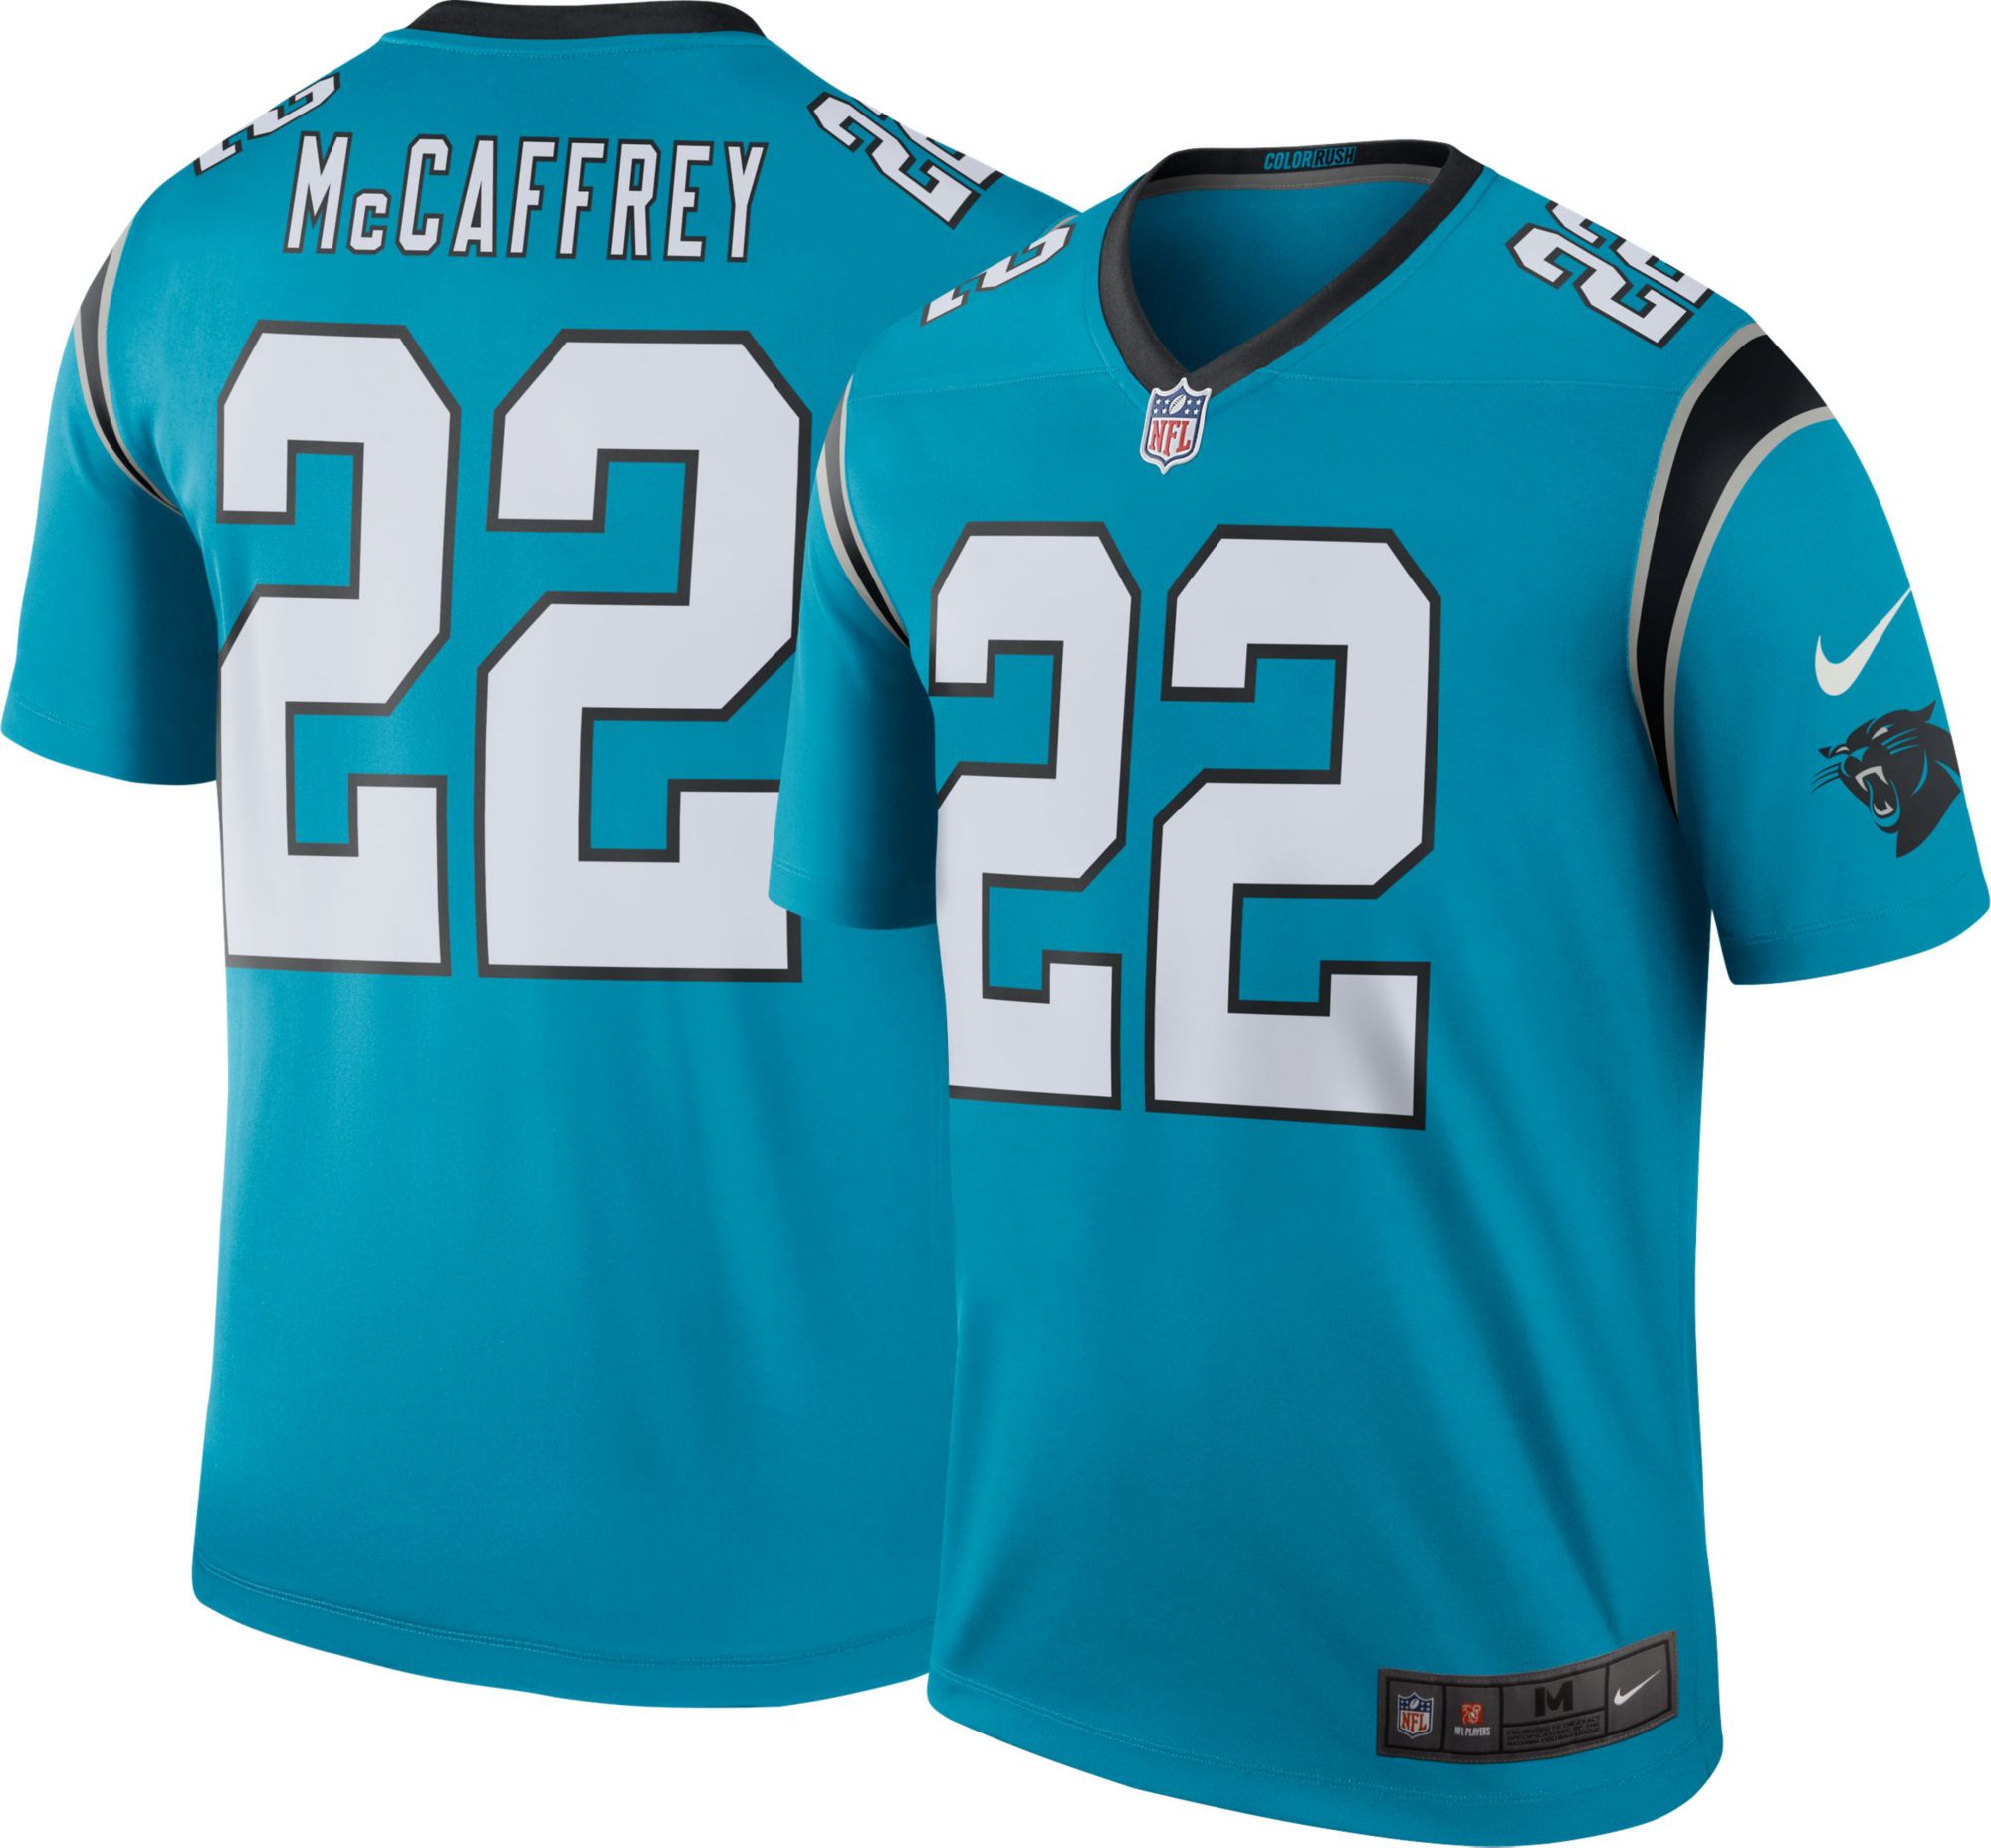 panthers home jersey color